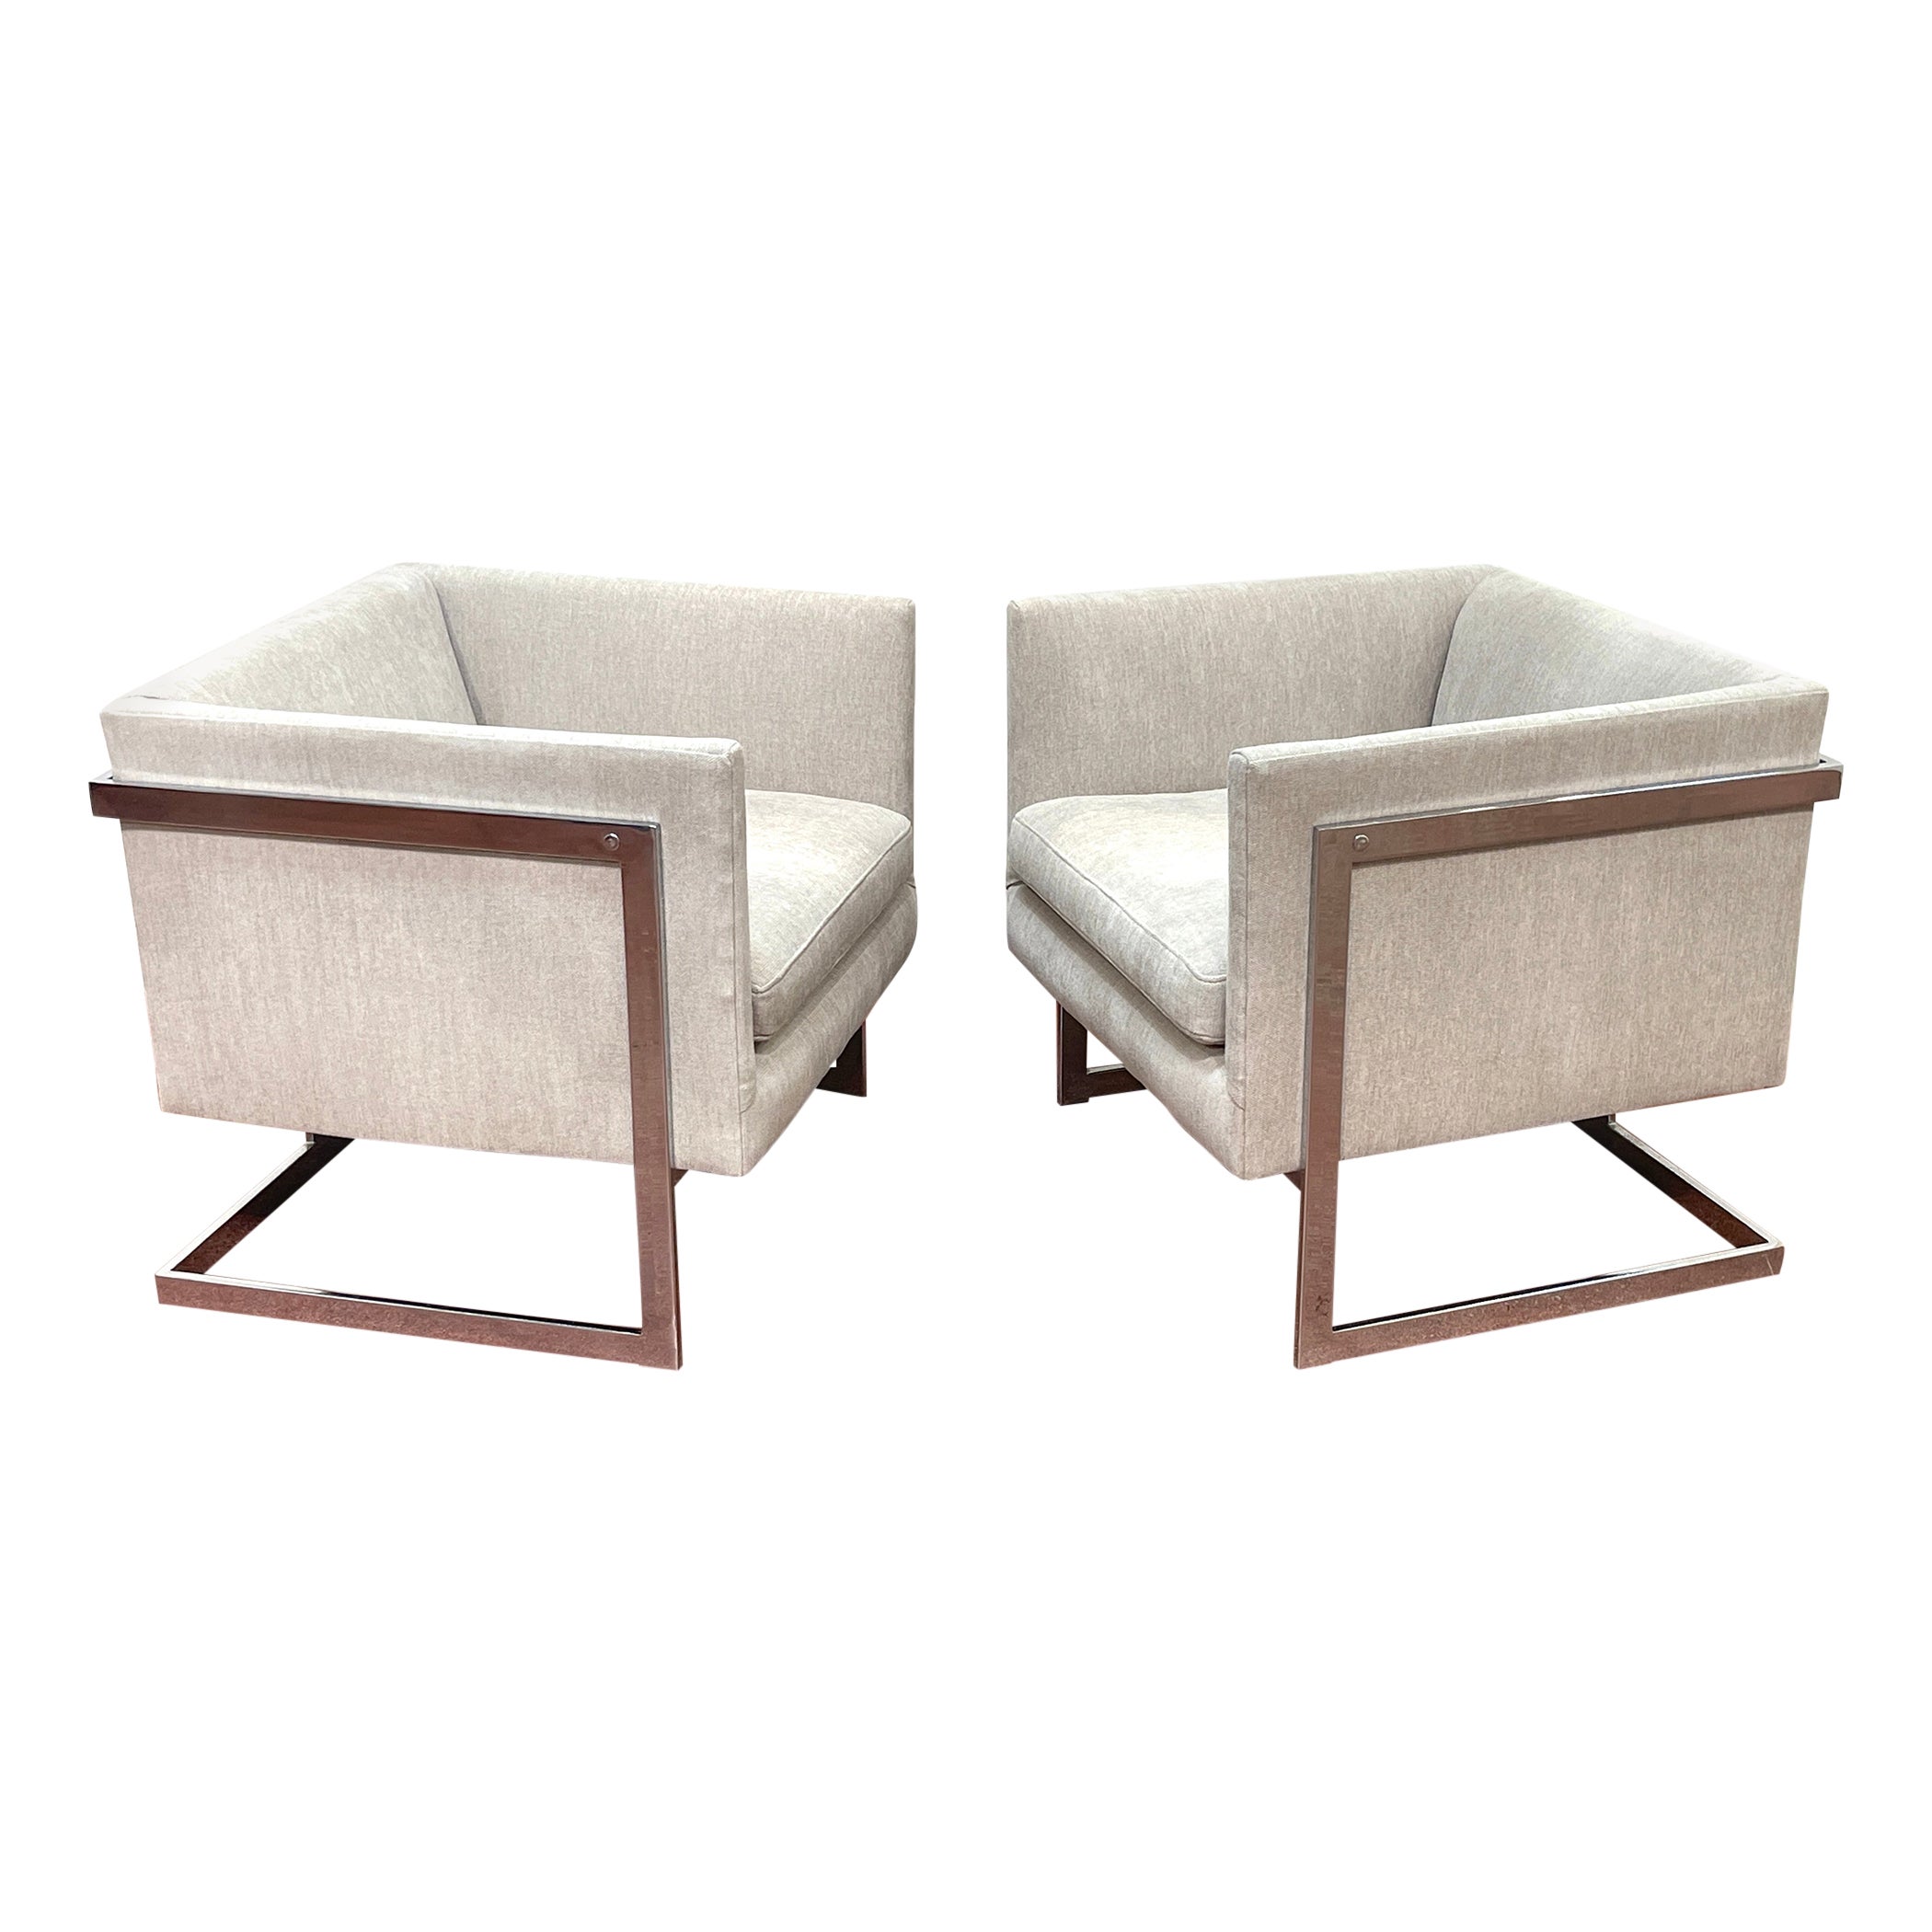 Pair of Milo Baughman Floating Cube Club Chairs, with Kravet Upholstery  For Sale